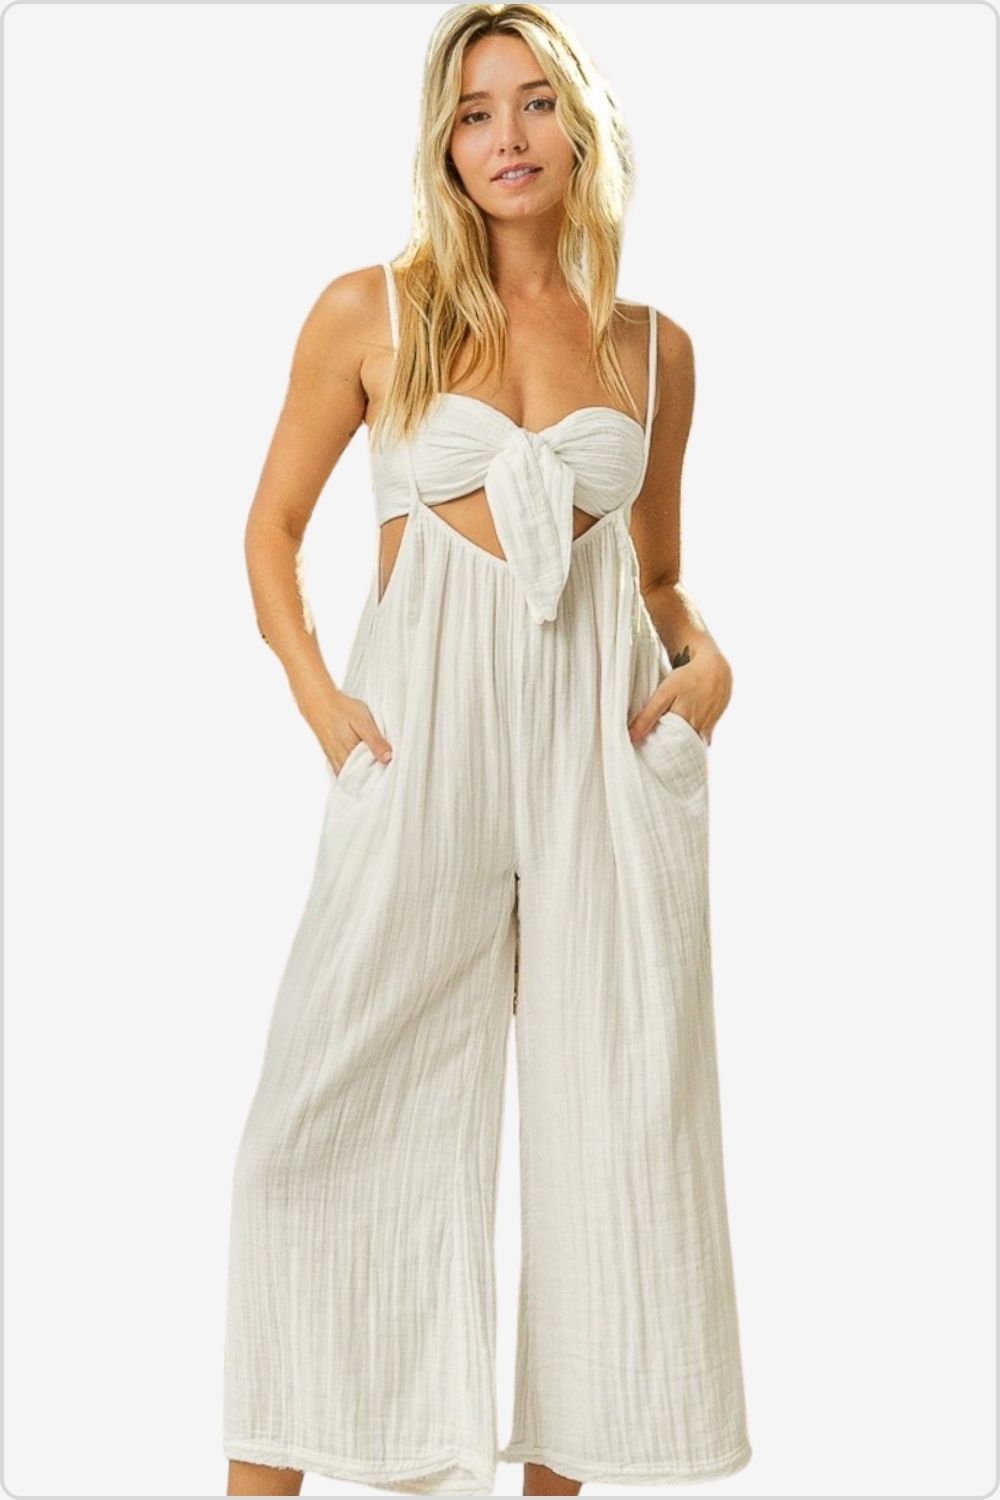 Trendy cream ruched tie-front tube top with coordinating suspender pants for a stylish summer look